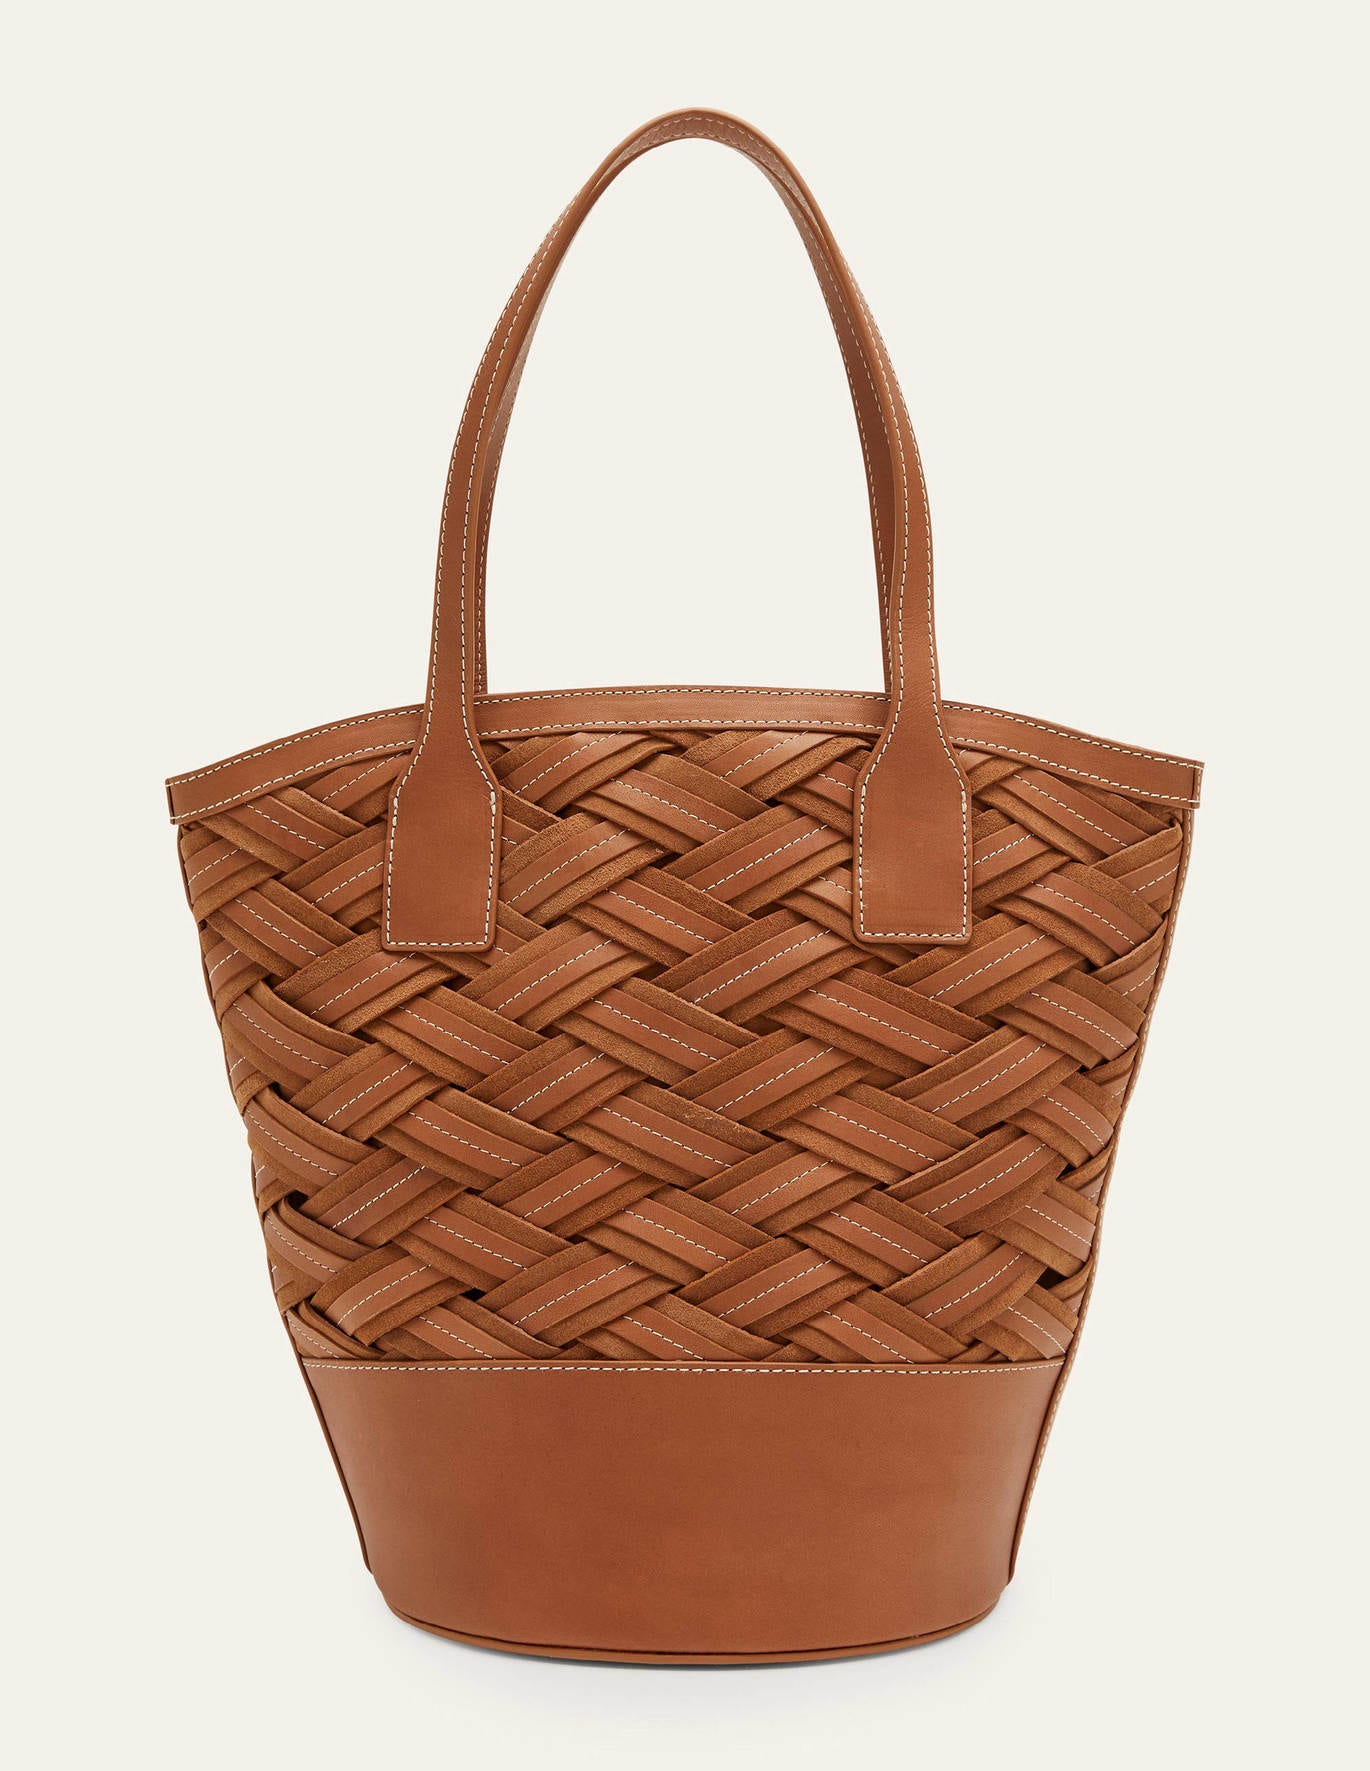 Boden Woven Leather Bag - Tan